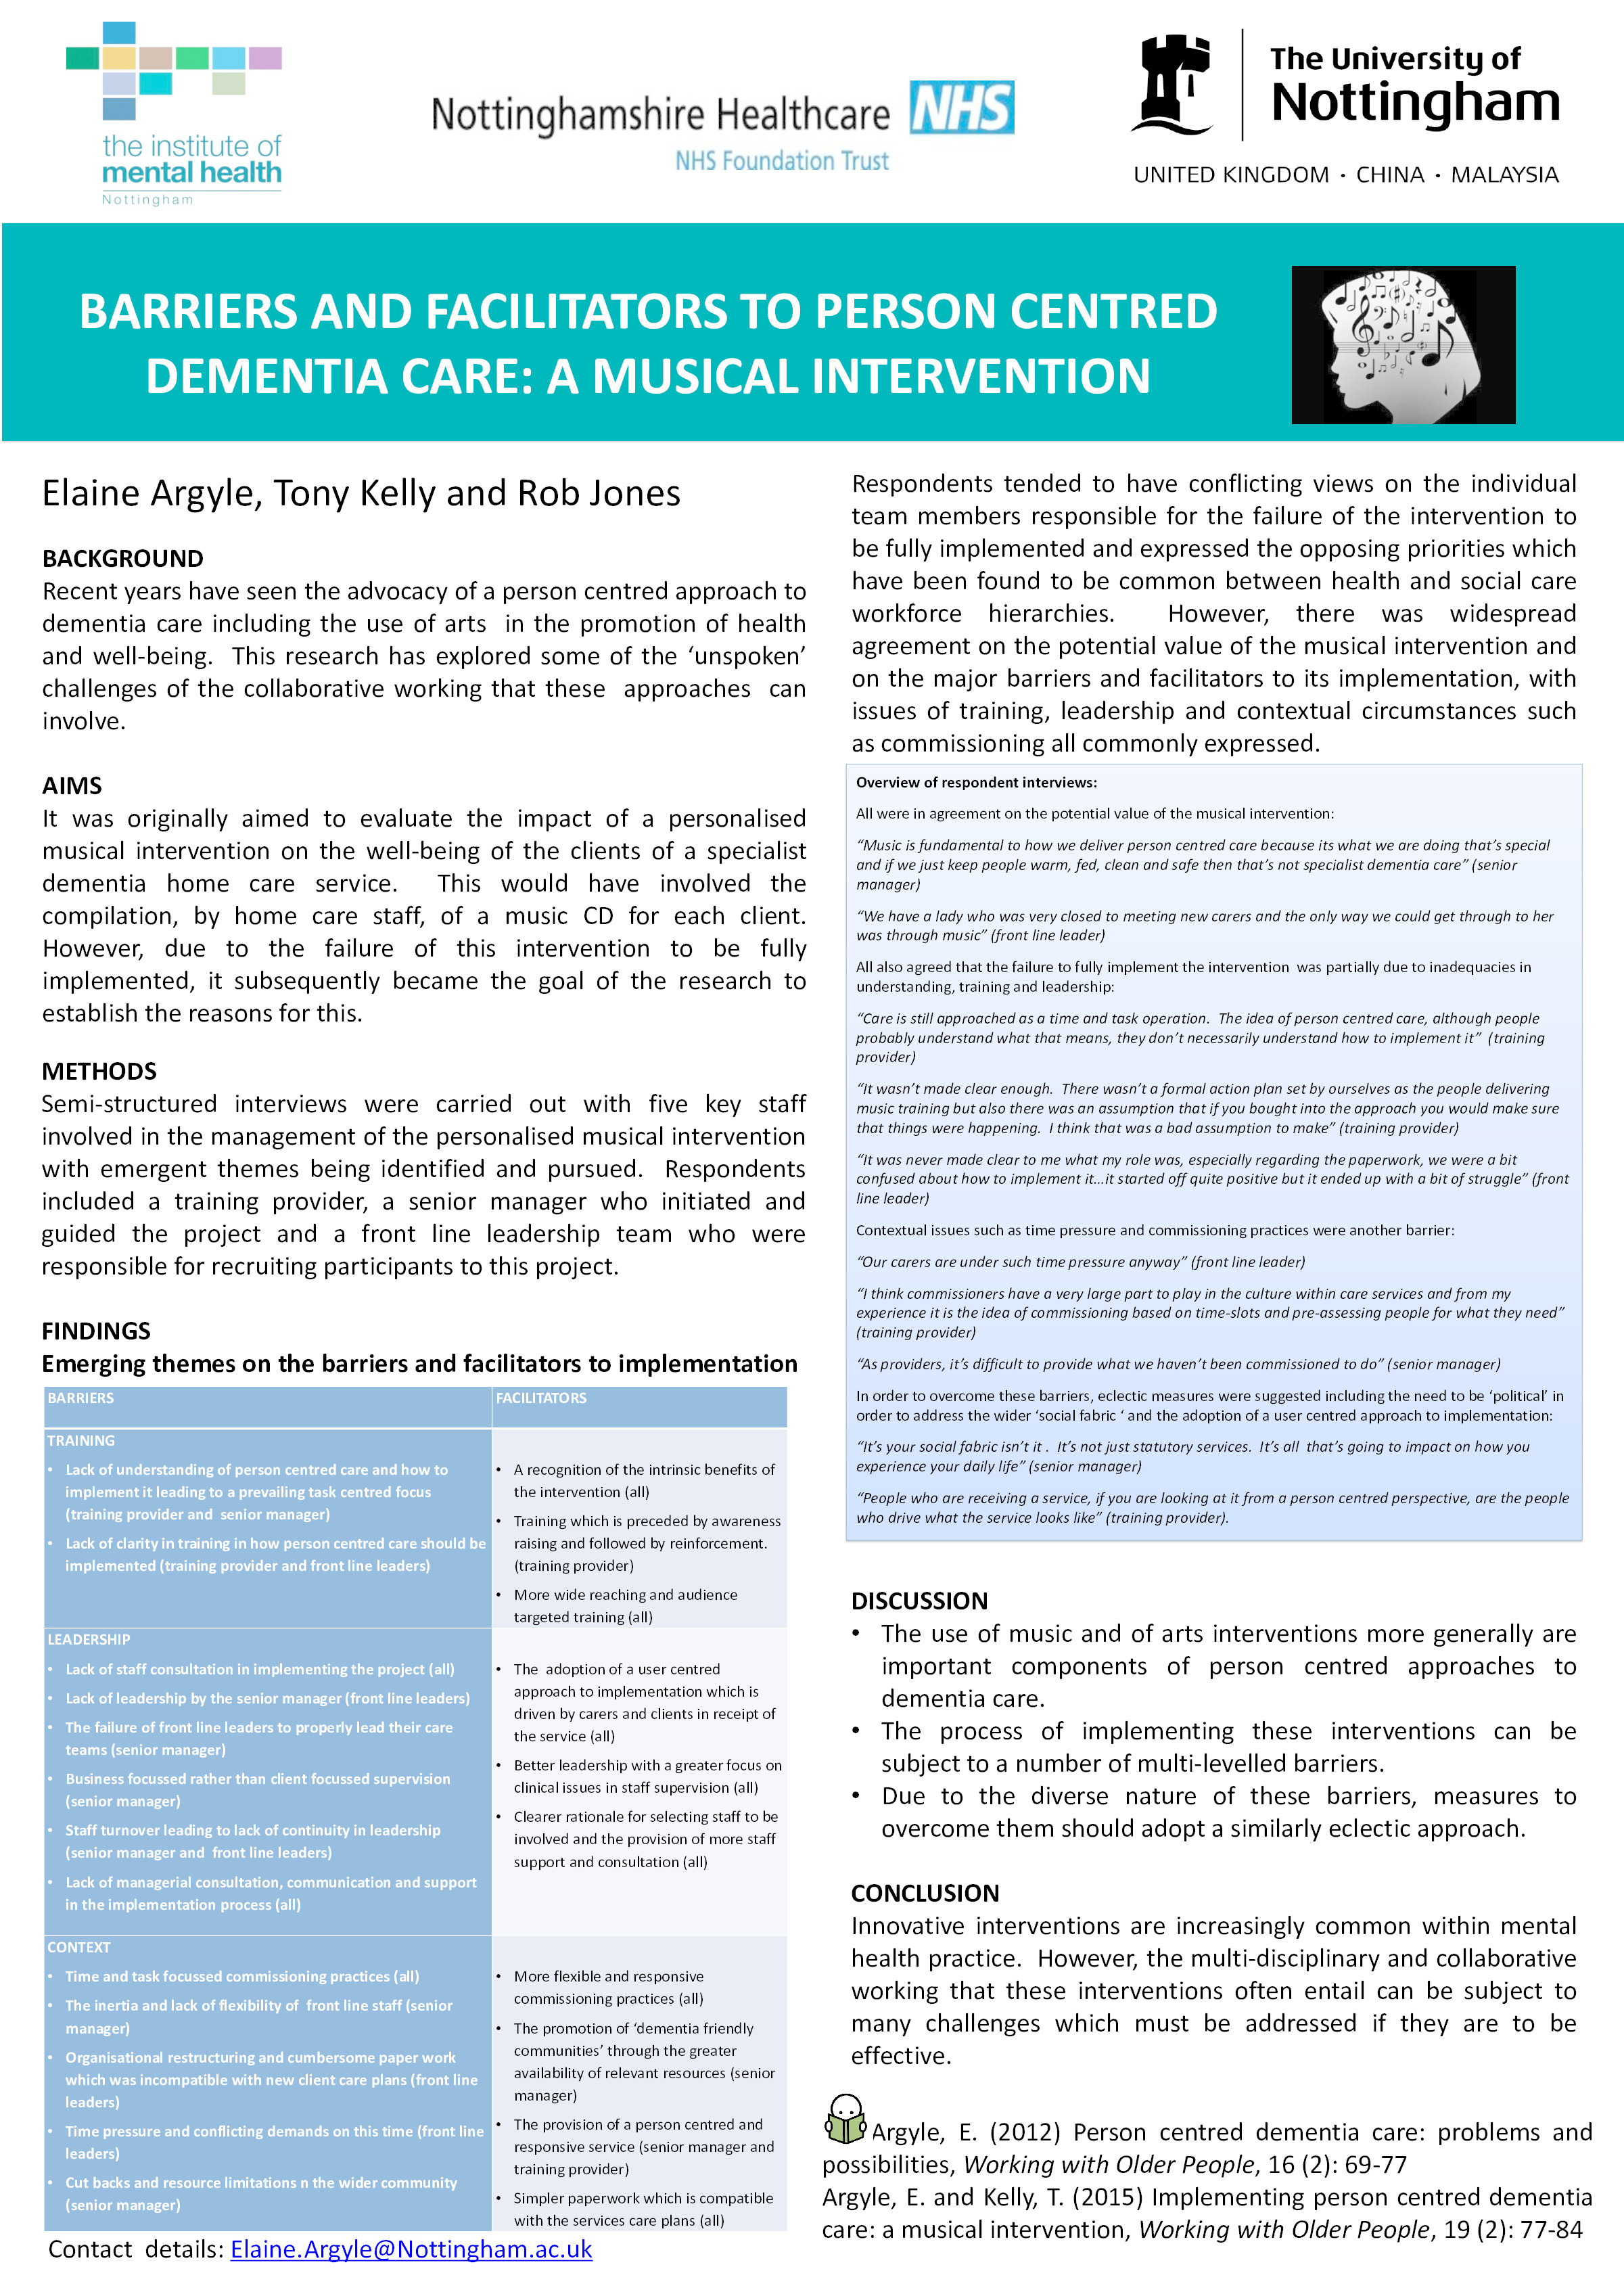 Barriers and facilitators to person centred dementia care: a musical intervention Thumbnail